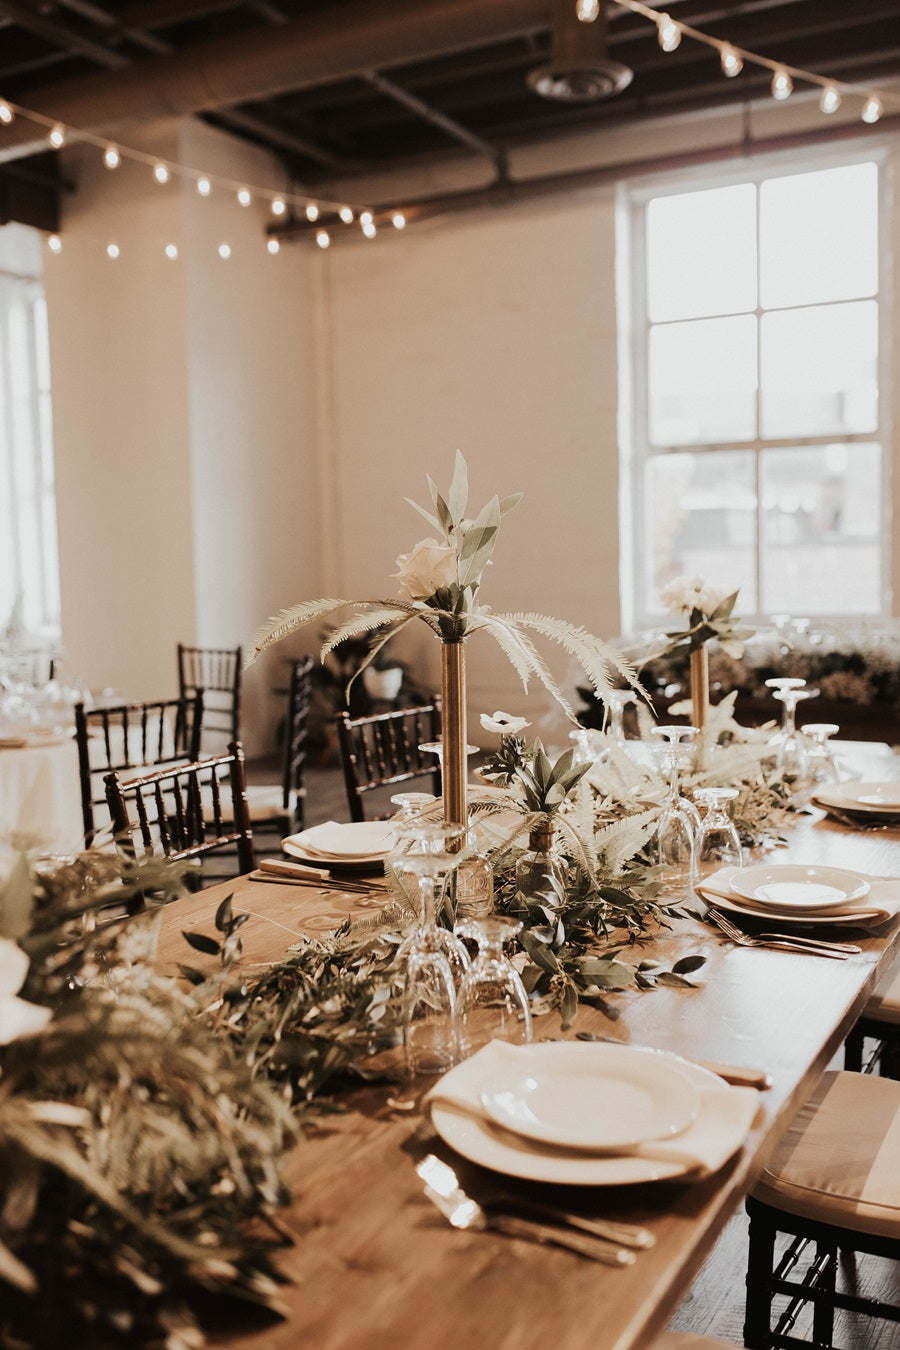 Table with loose greenery, centerpieces, and bud vases. The style is natural and neutral.